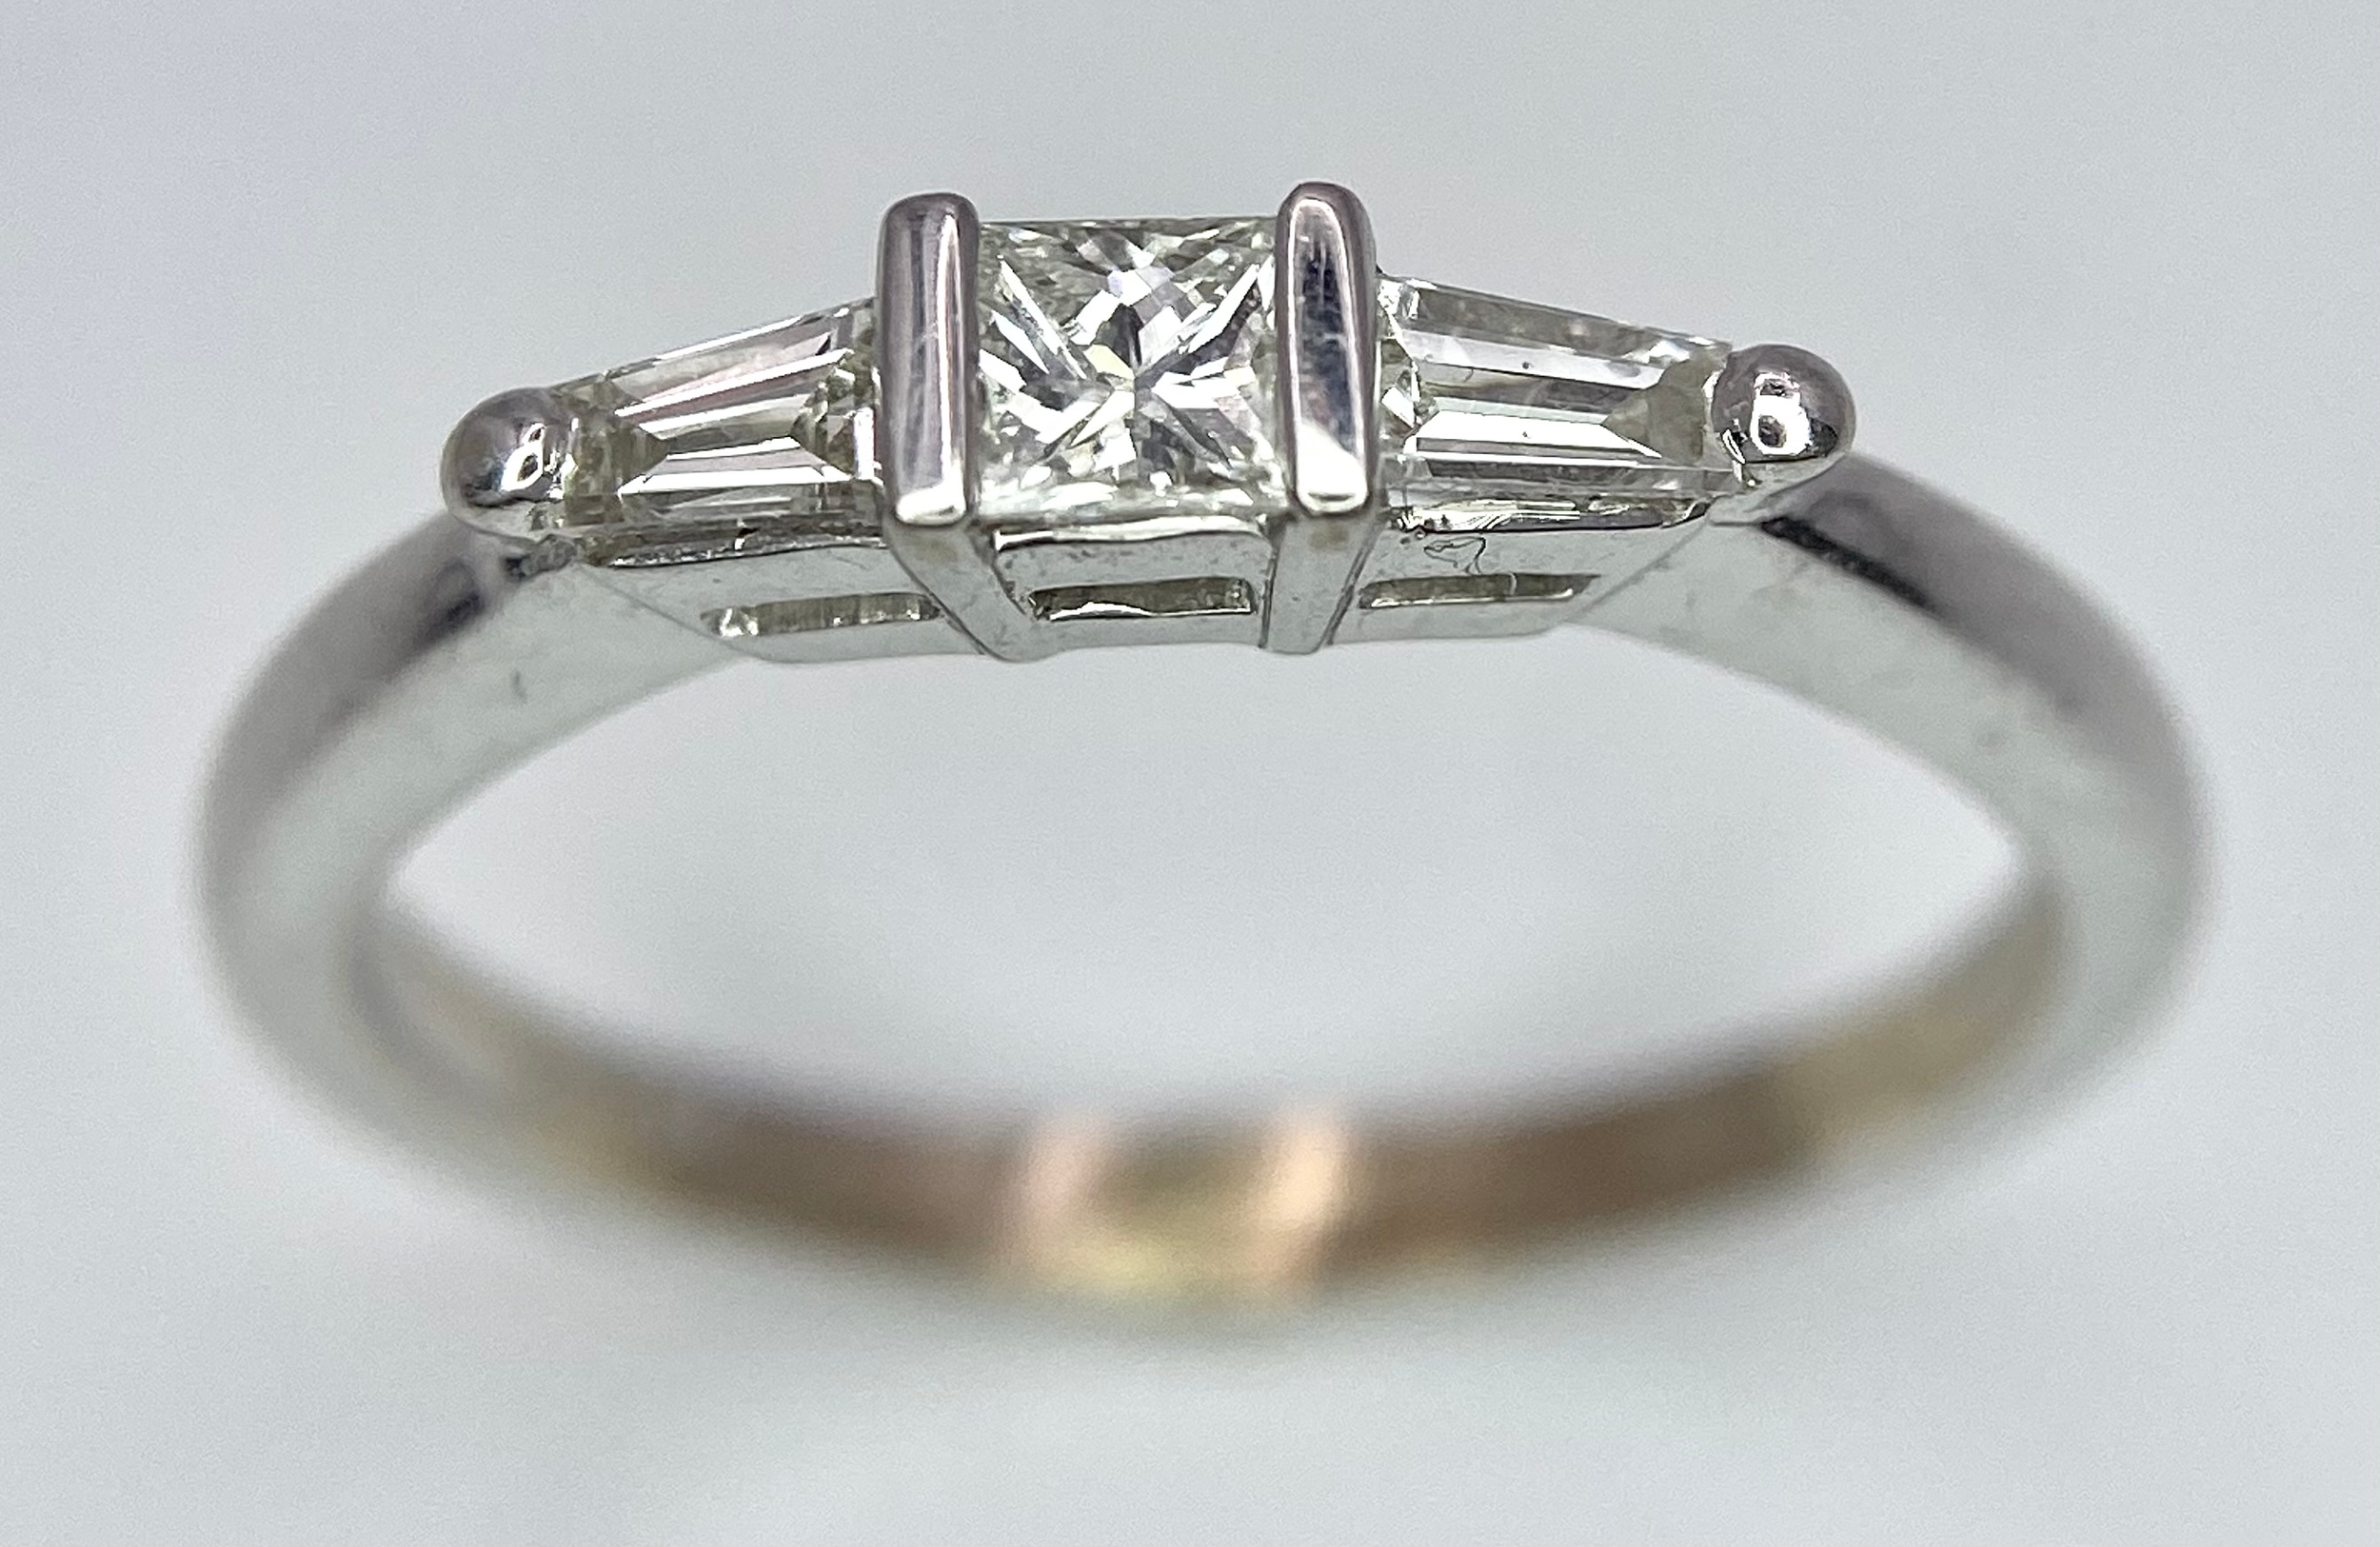 AN 18K WHITE GOLD, DIAMOND 3 STONE RING - PRINCESS CUT CENTRE WITH A TAPPERED BAGUETTE DIAMOND - Image 2 of 7